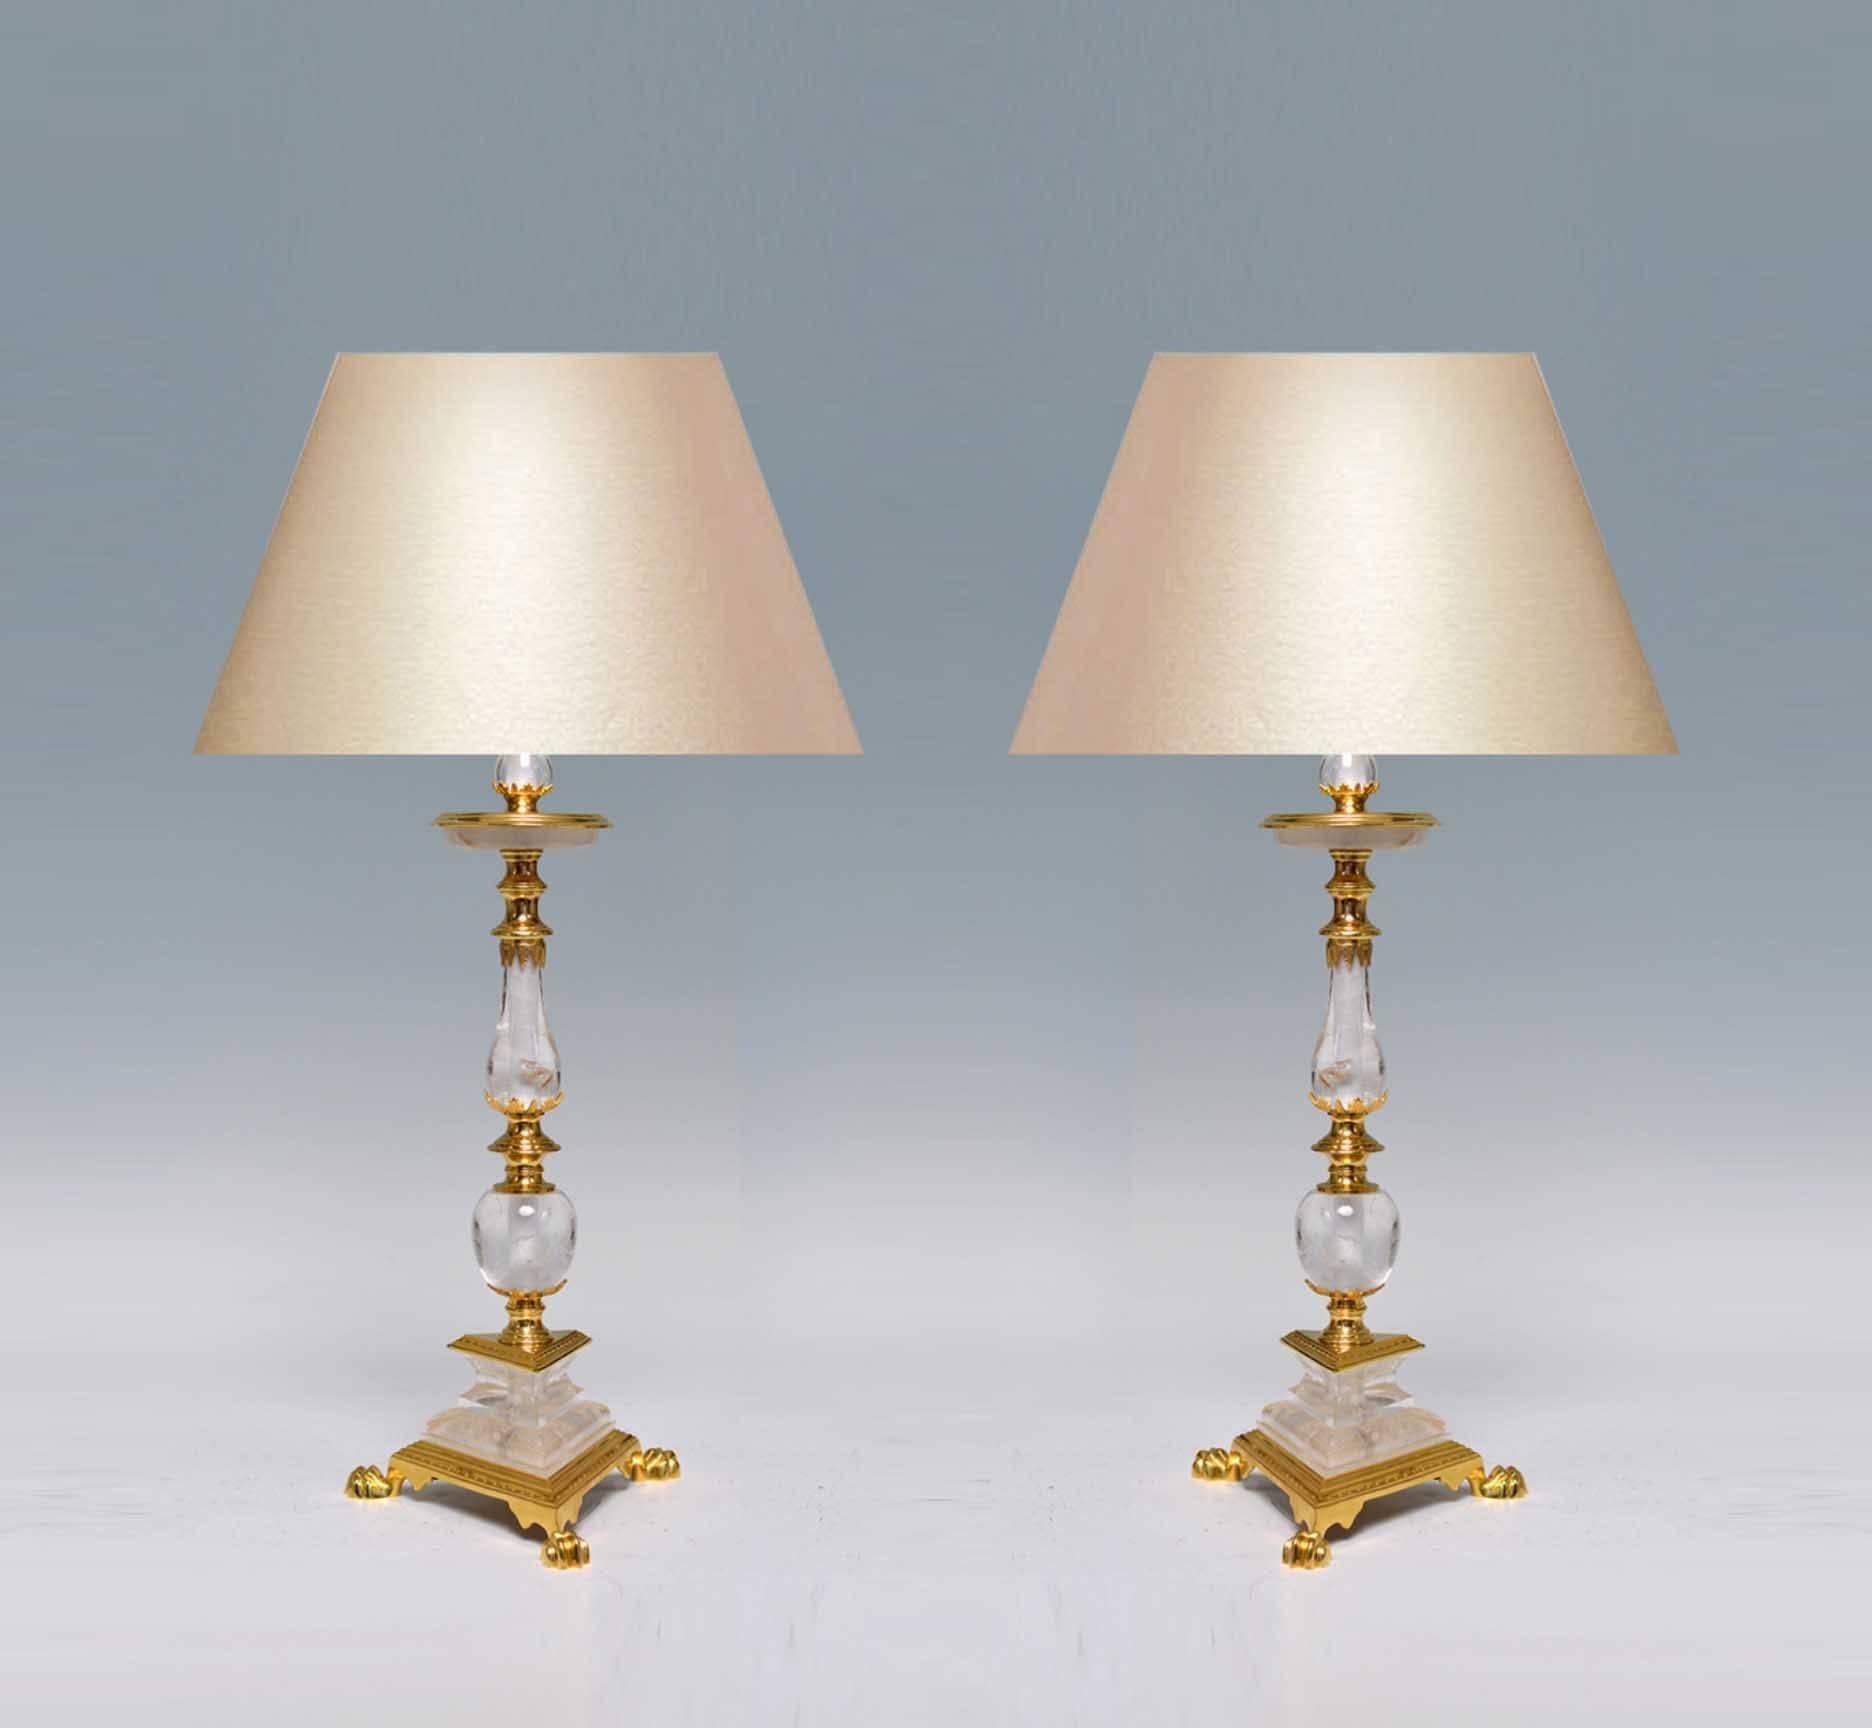 Fine cast polish bronze with finely carved rock crystal ormolu-mounted lamps, created by Phoenix Gallery, NYC.
To the rock crystal: 20